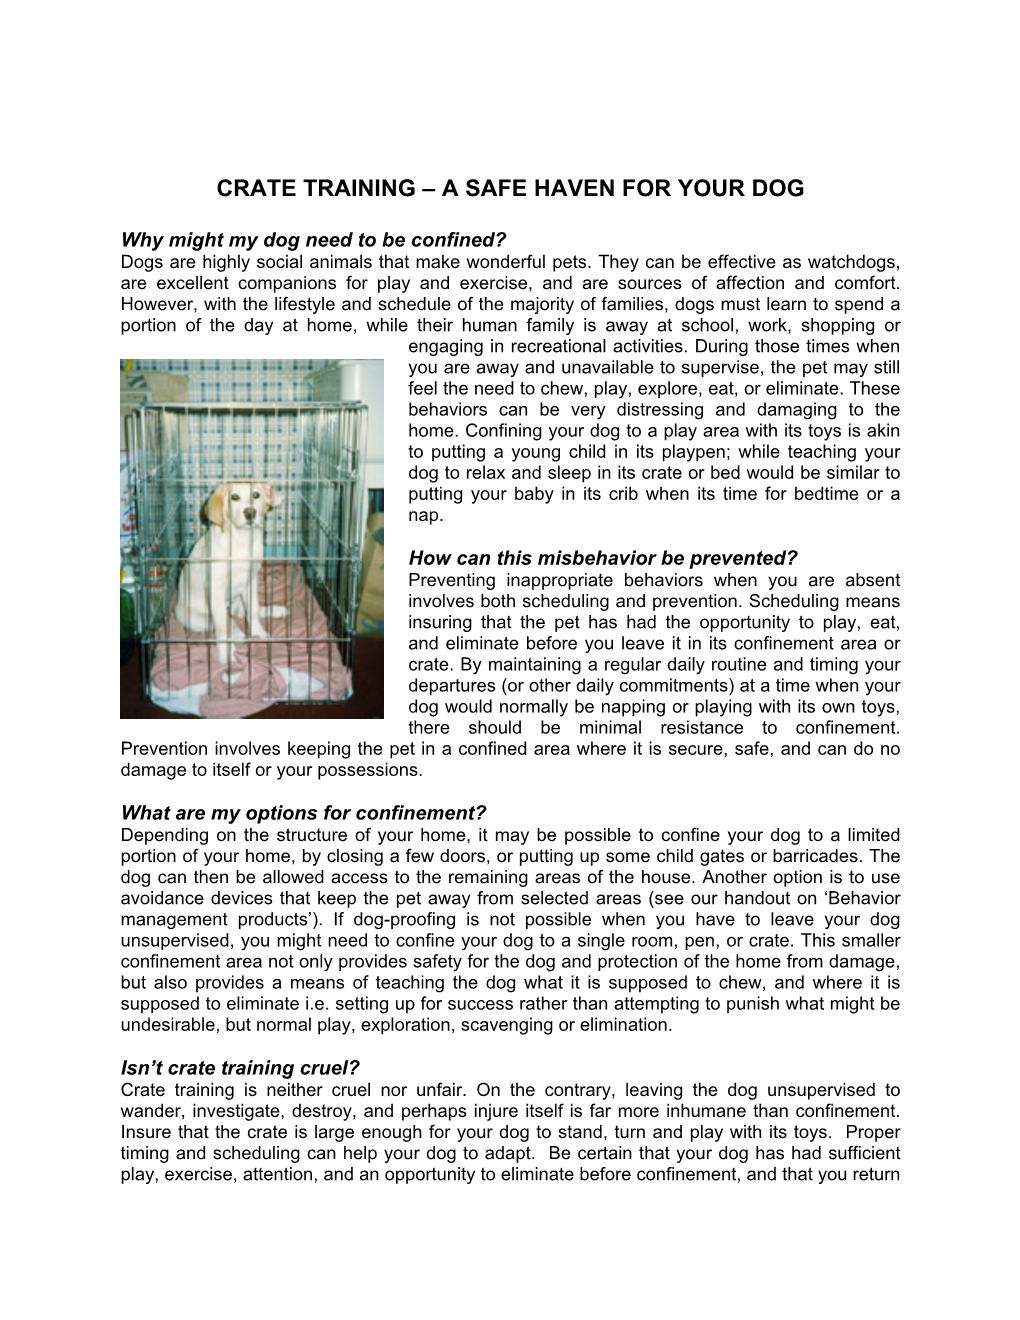 Crate Training – a Safe Haven for Your Dog